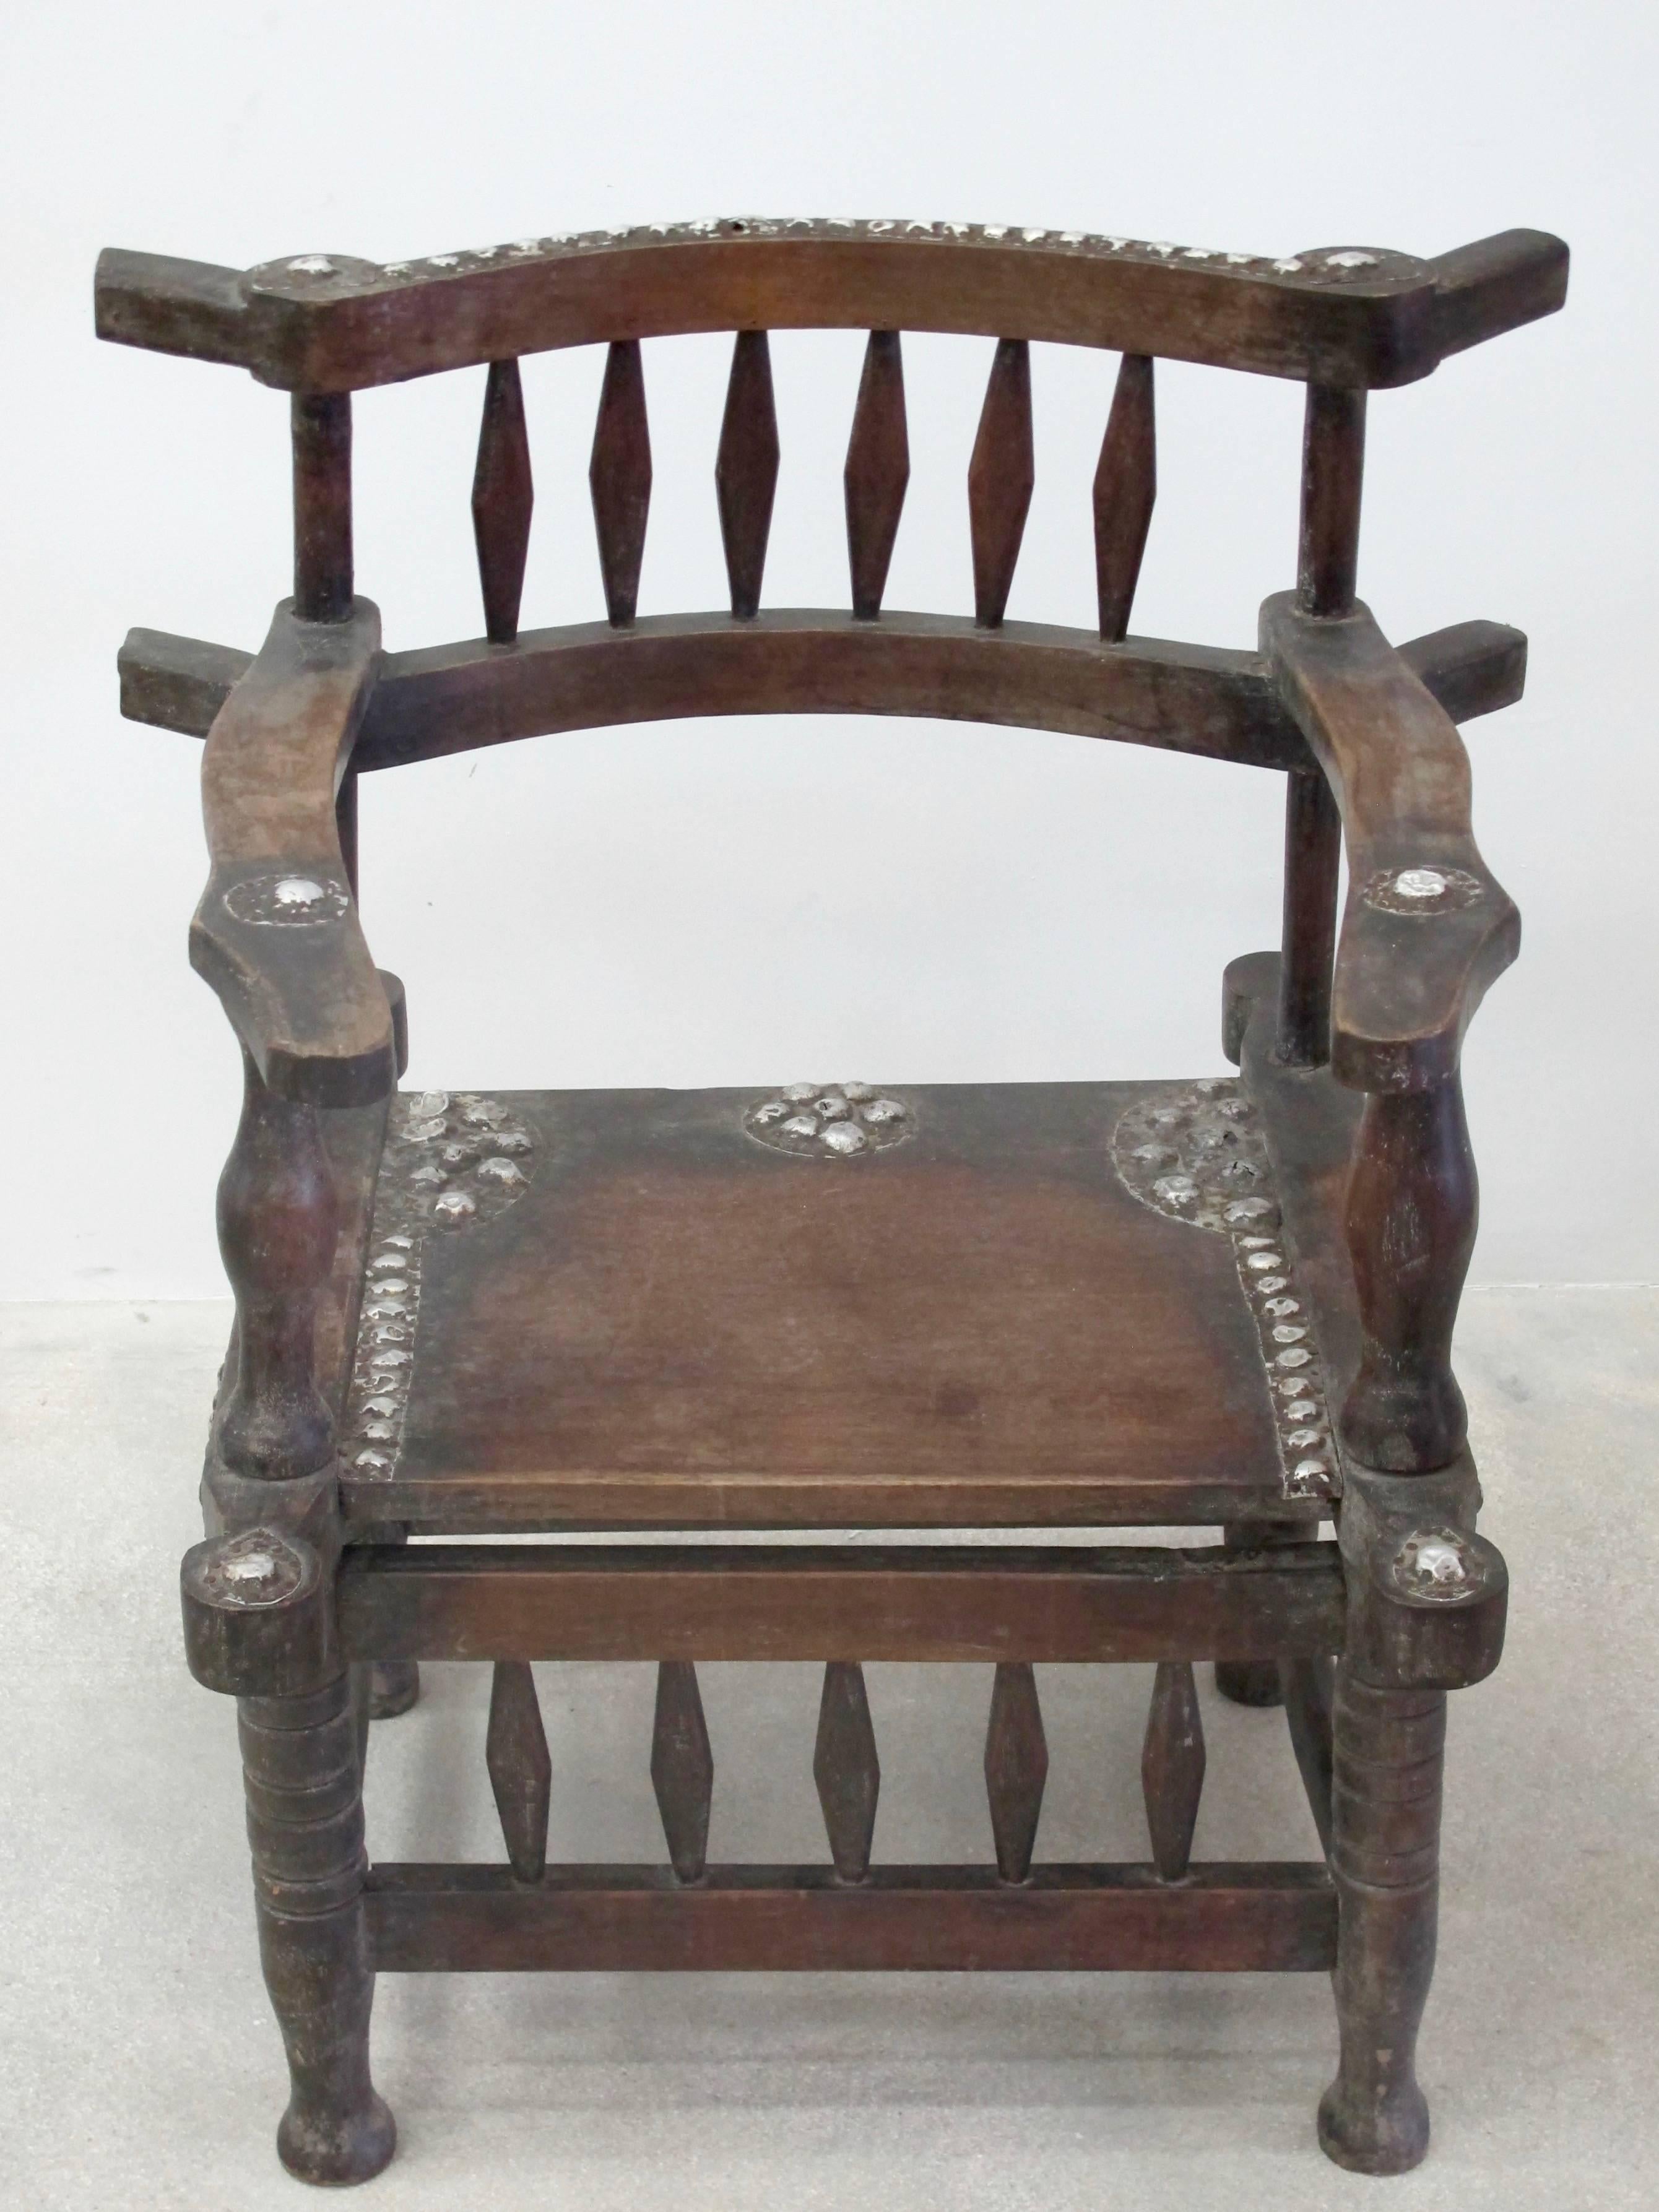 Rare Vintage 1950s Ashanti Throne Chair With Metal Studs

Offered for sale is rare 1950s Ashanti throne chair created in wood with metal stud decorations. This 20th-century chair is from Ghana, Africa and is in original condition with a vintage